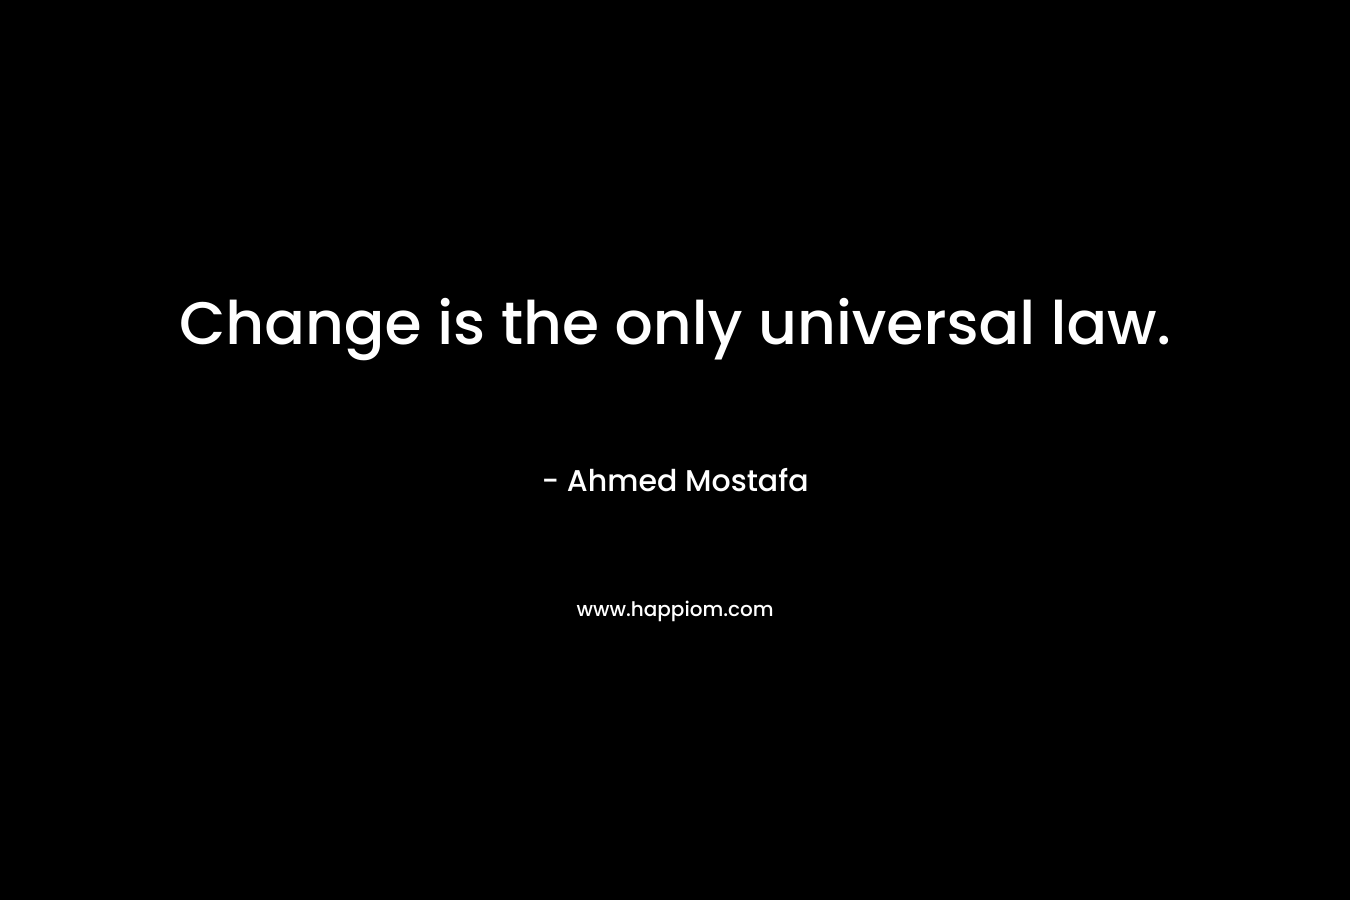 Change is the only universal law.